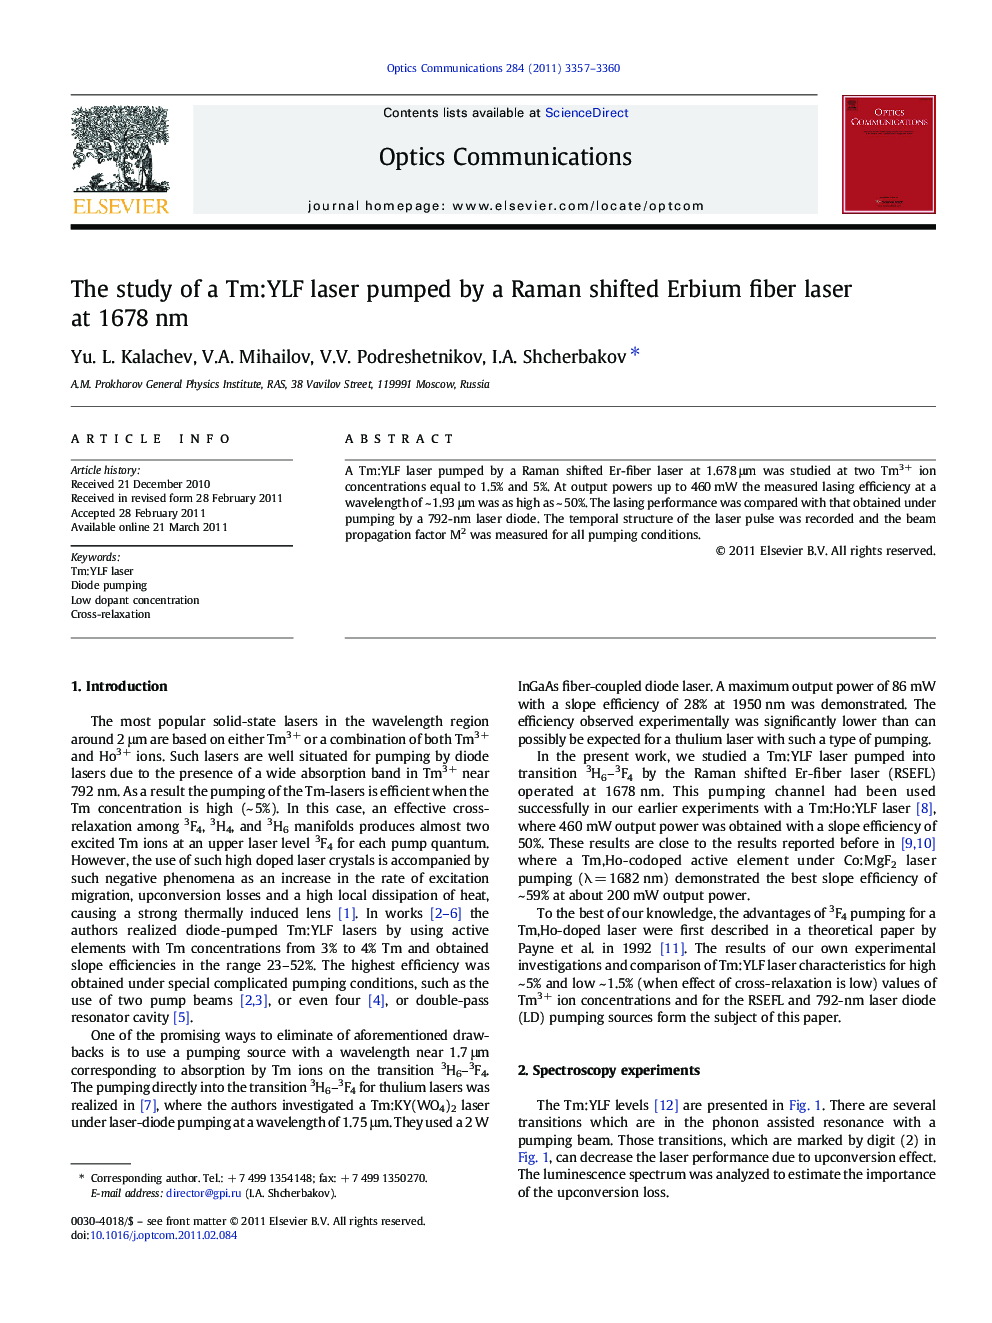 The study of a Tm:YLF laser pumped by a Raman shifted Erbium fiber laser at 1678Â nm